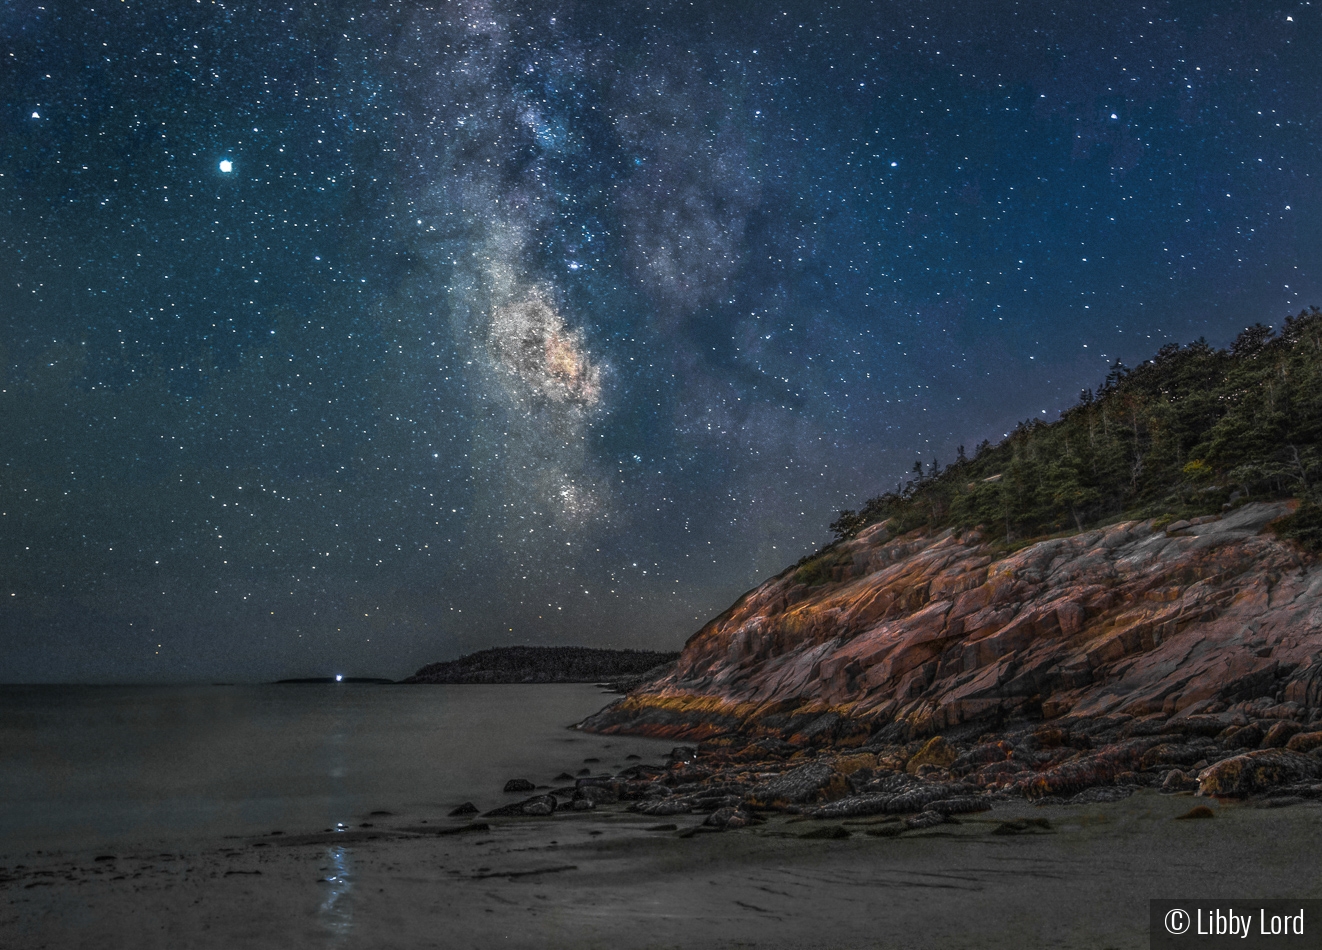 Milky Way over the Beach by Libby Lord